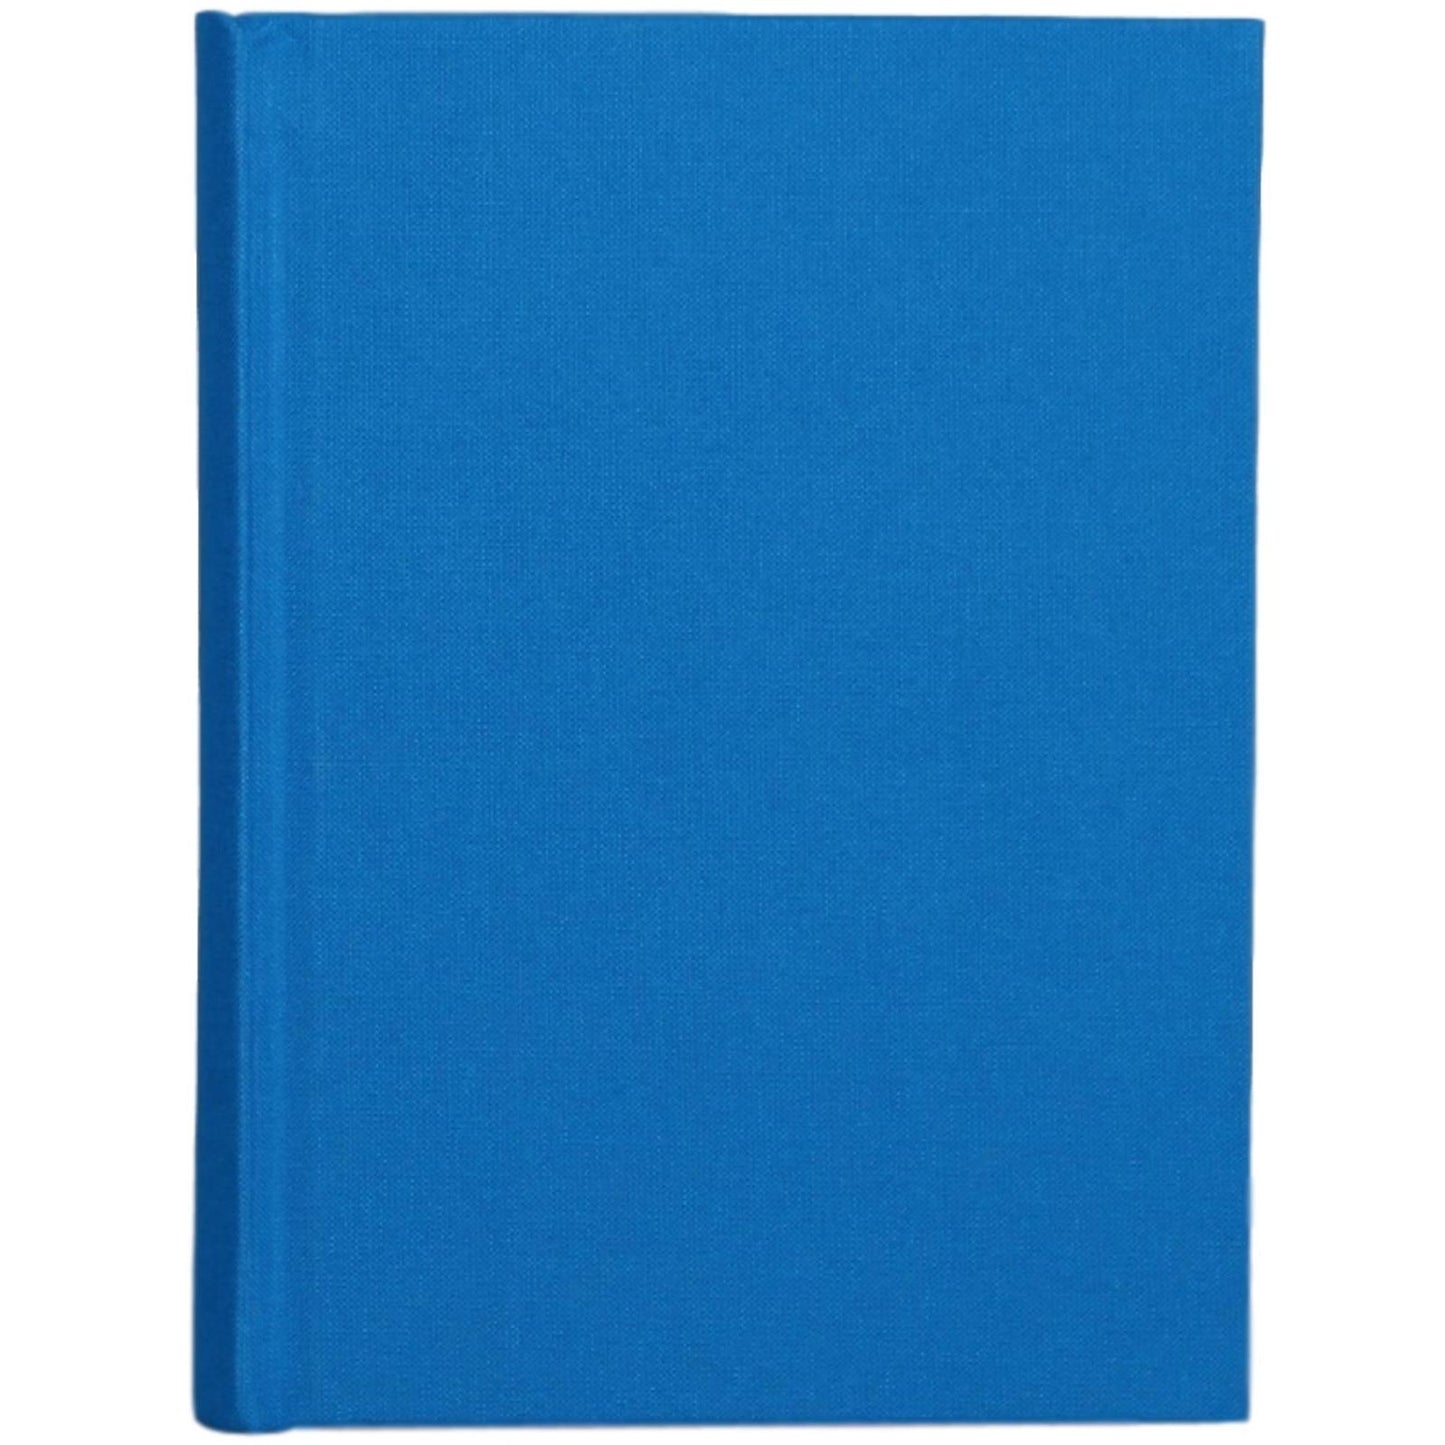 Hardcover Lined Ruled Journal Notebook Diary Book - Blue - 5" X 7"